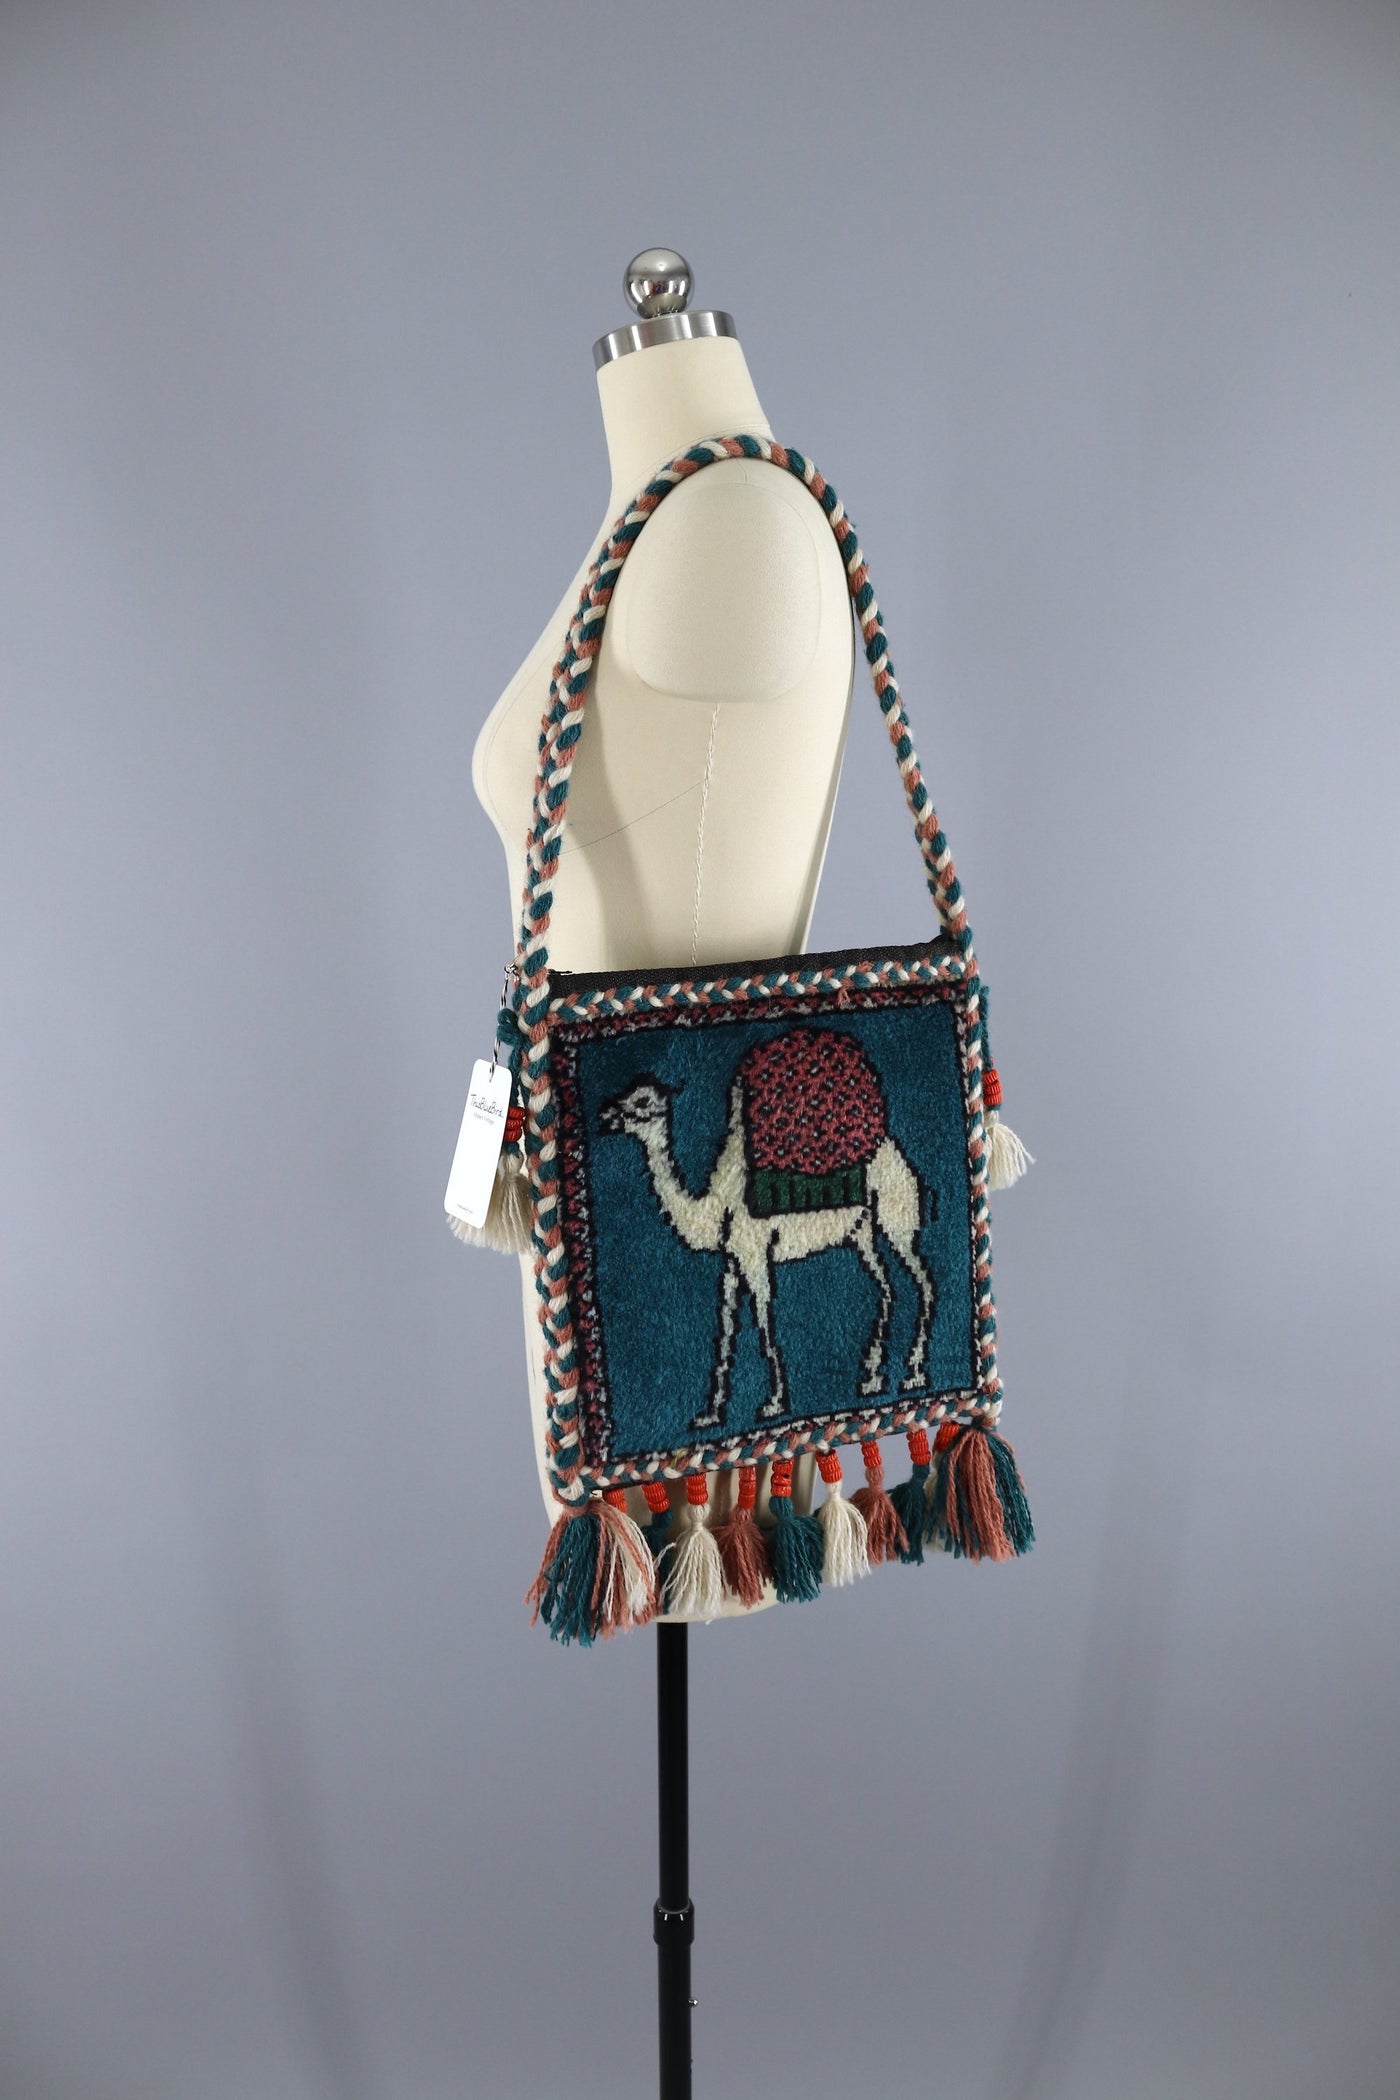 Vintage 1970s - 1980s Egyptian CAMEL Carpet Bag with Beaded Tassels - ThisBlueBird